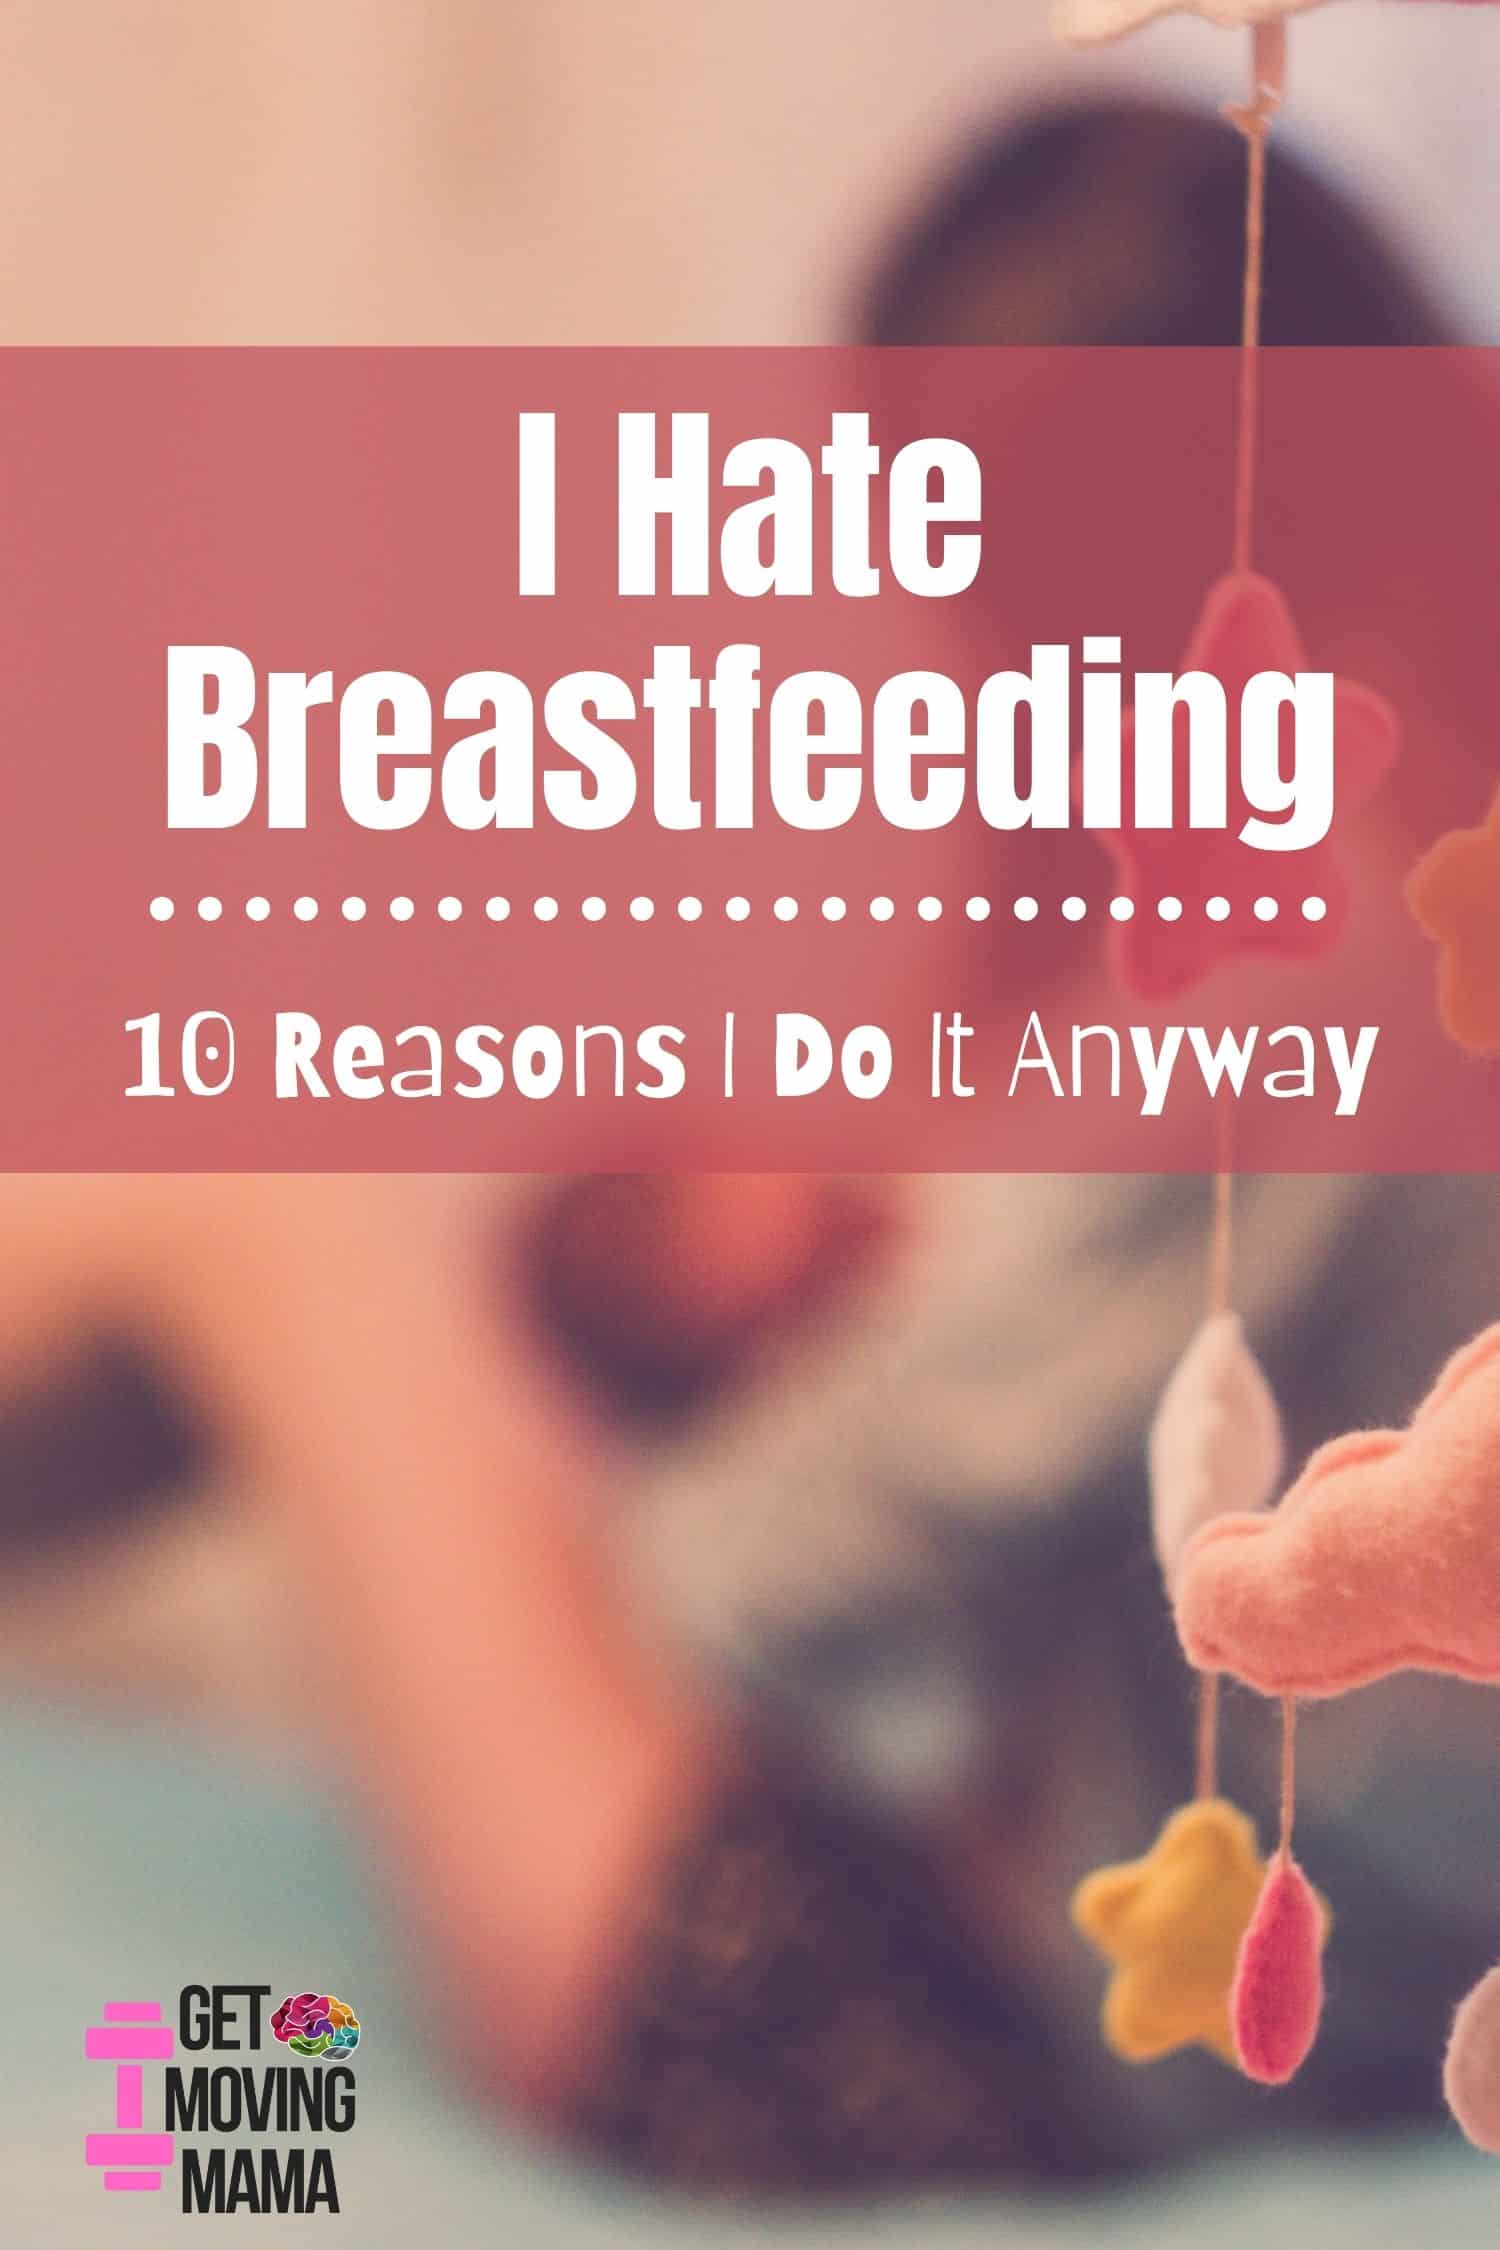 A picture of an infant mobile with mom in background nursing a baby with text that says "I hate breastfeeding 10 reasons I do it anyway" in white on a red rectangle.